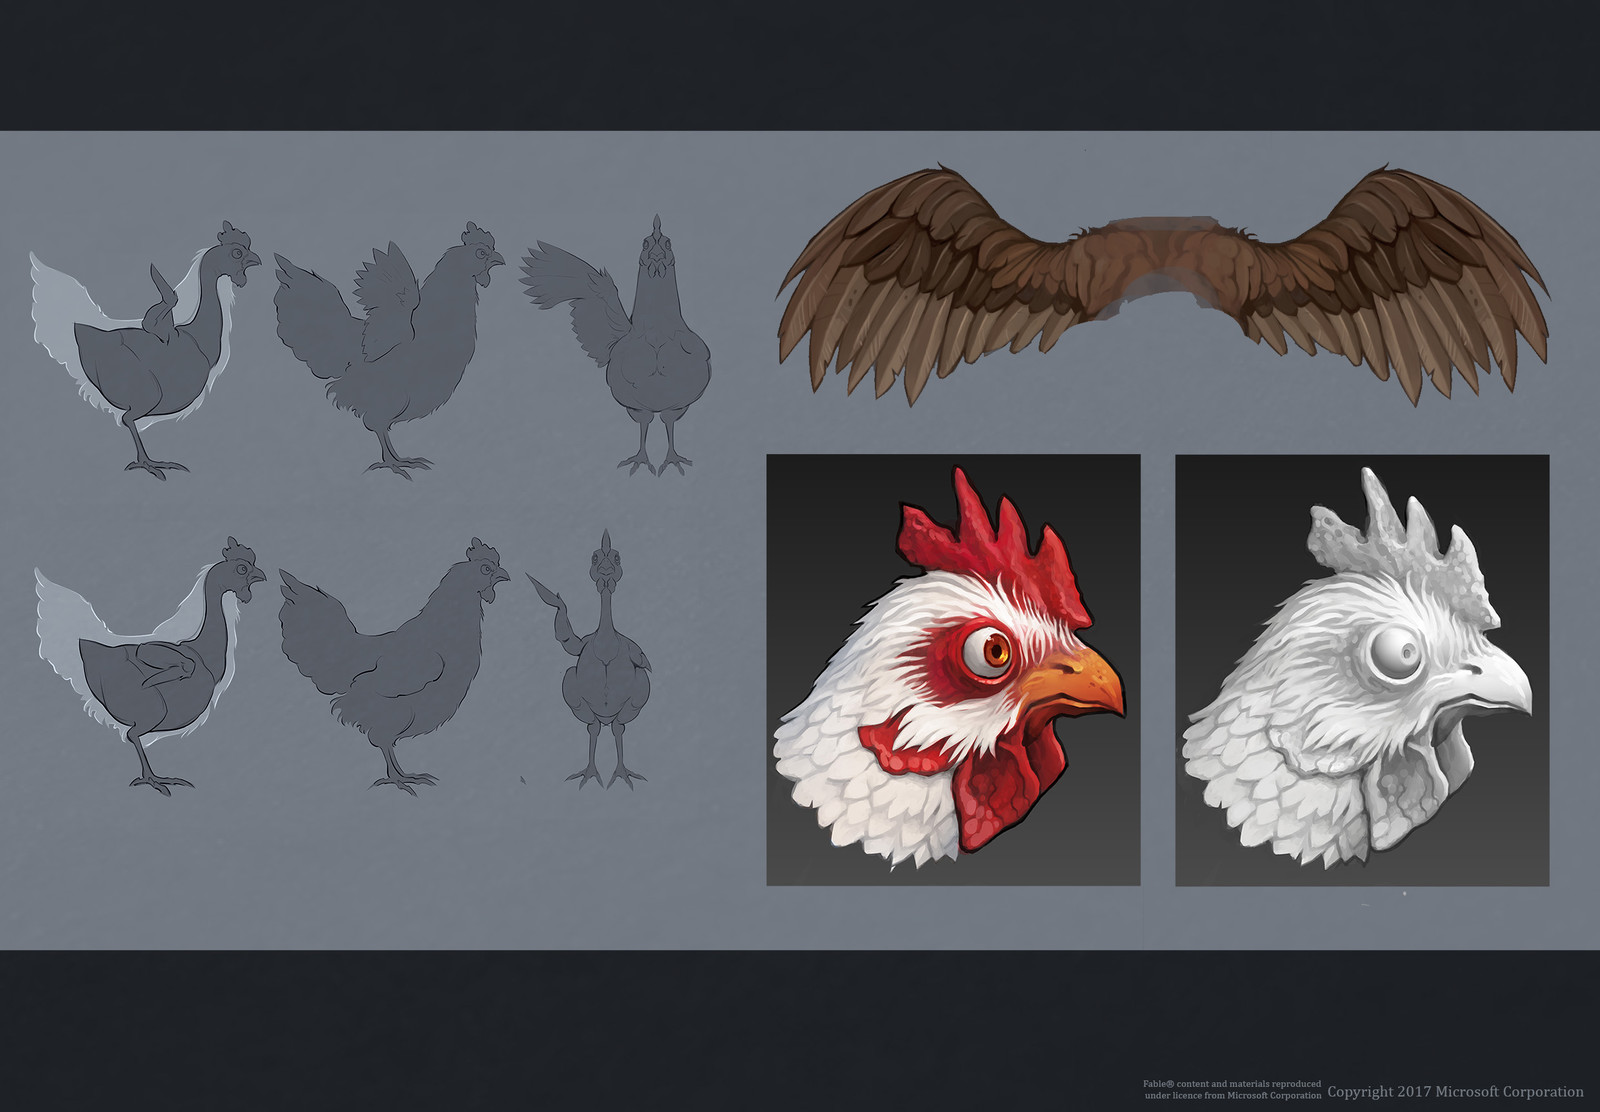 Chicken concept for the Trailer